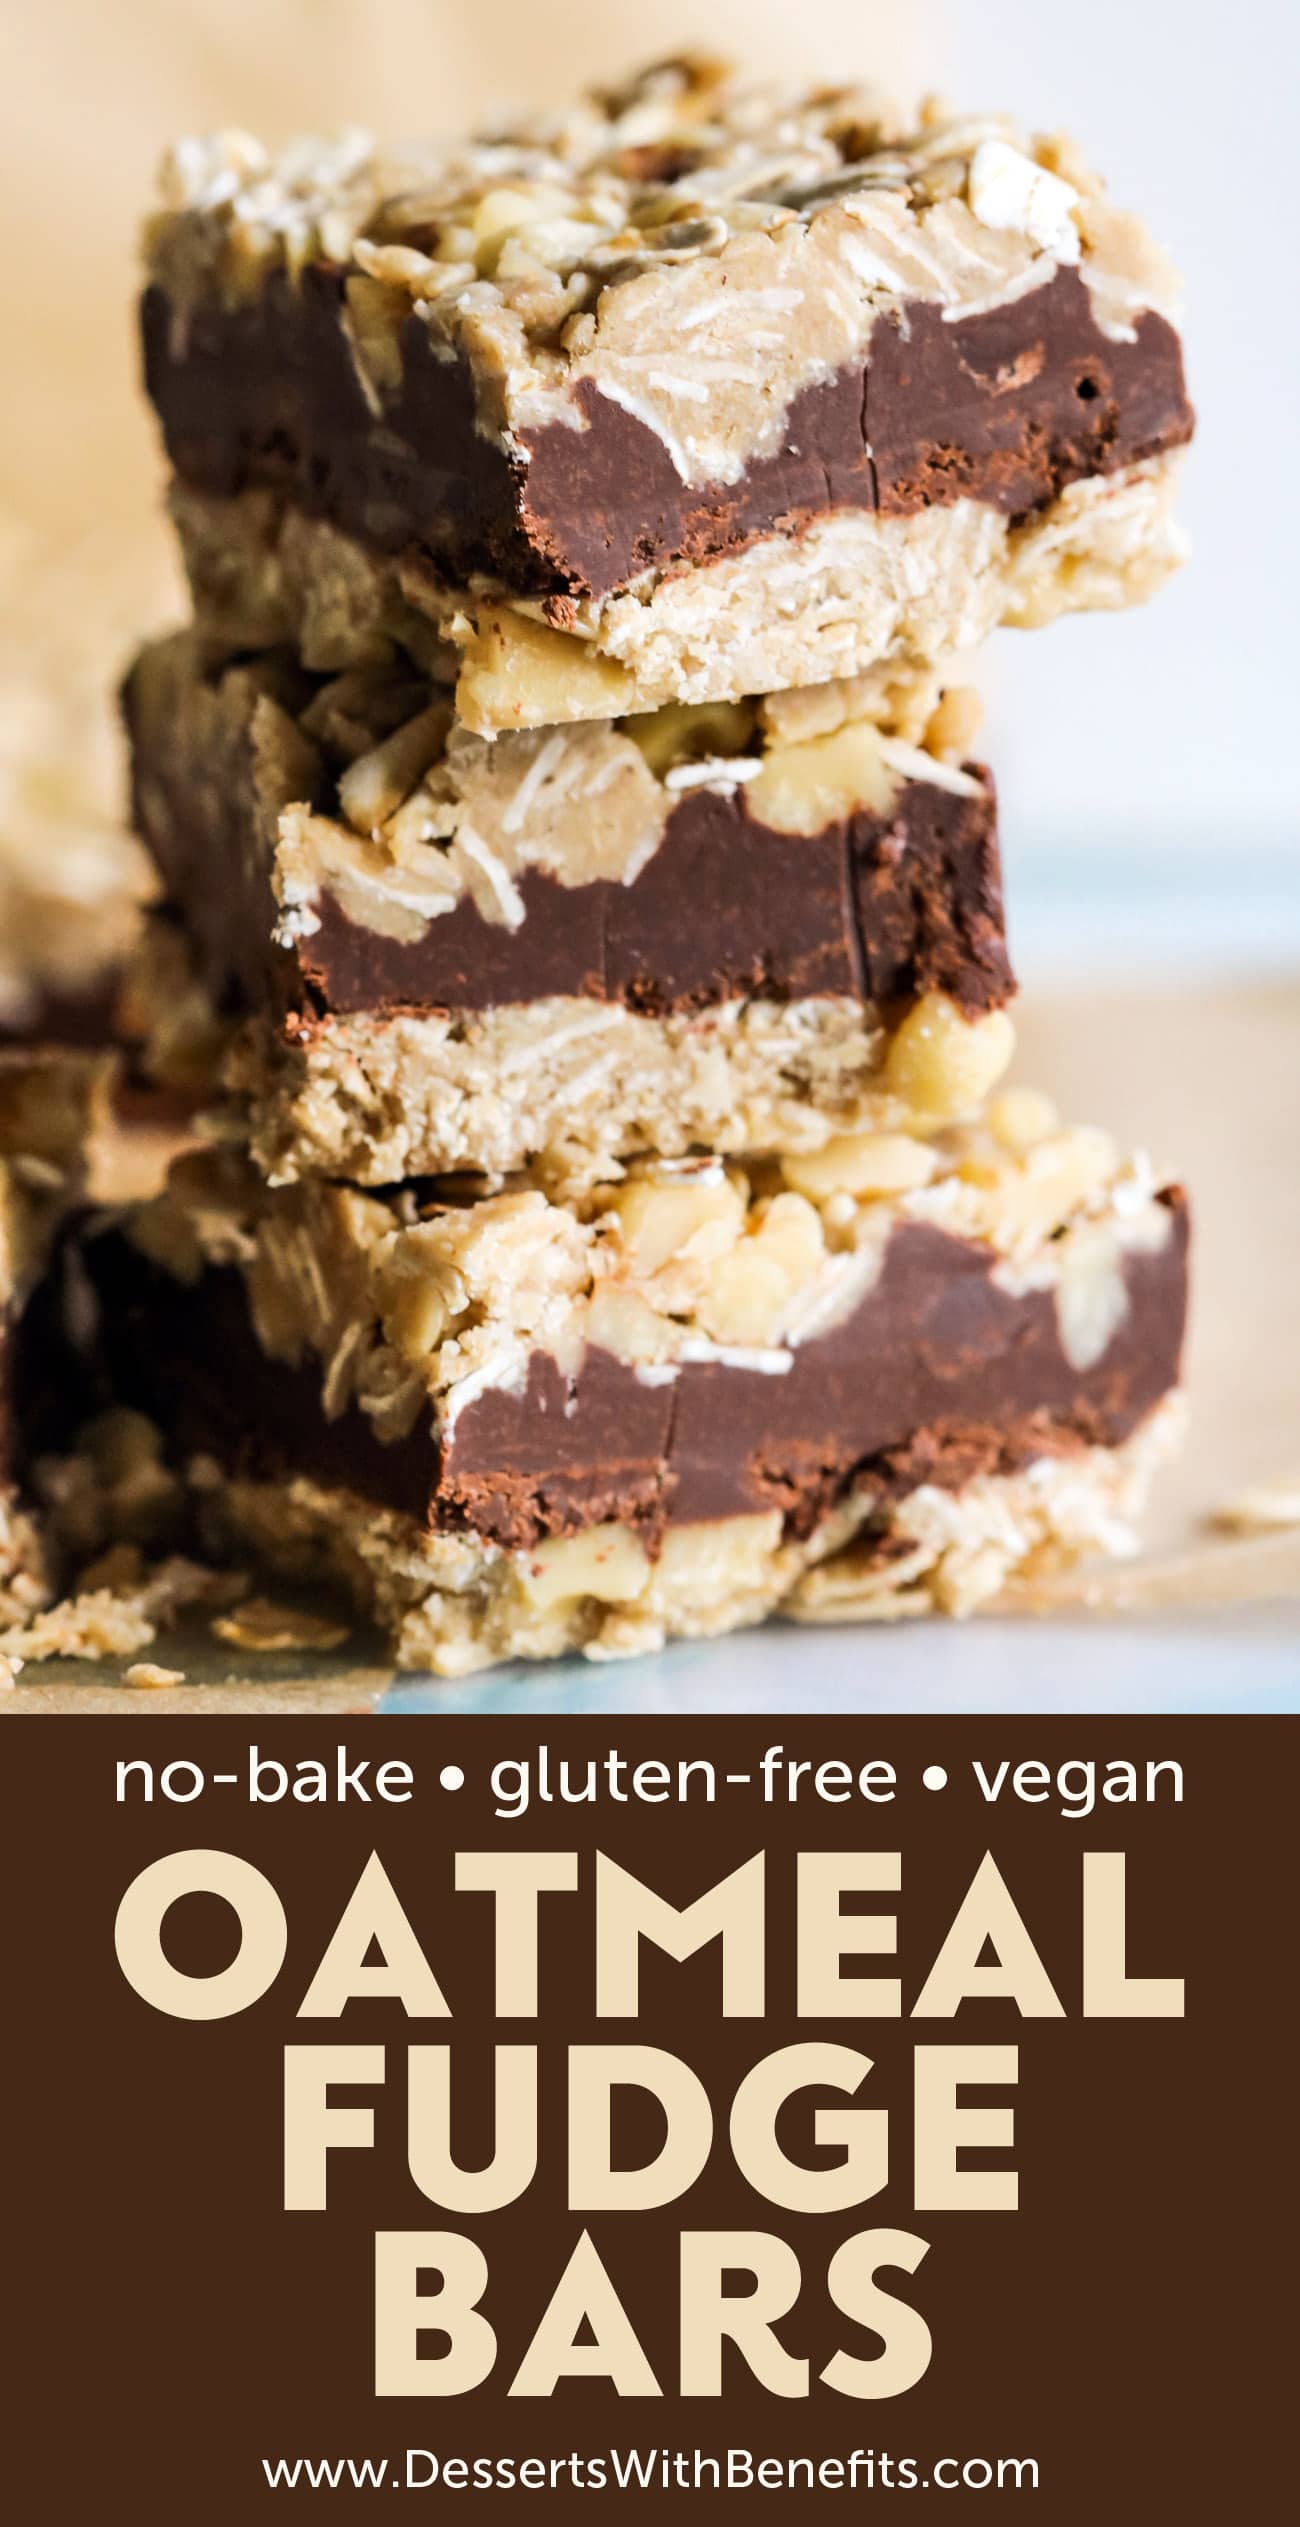 You’ve gotta try this easy no-bake Oatmeal Fudge Bars recipe! It’s the perfect breakfast or midday treat to satisfy your sweet tooth, guilt-free. Best of all, it’s gluten free, vegan, doesn’t require any baking, and only 8 ingredients!